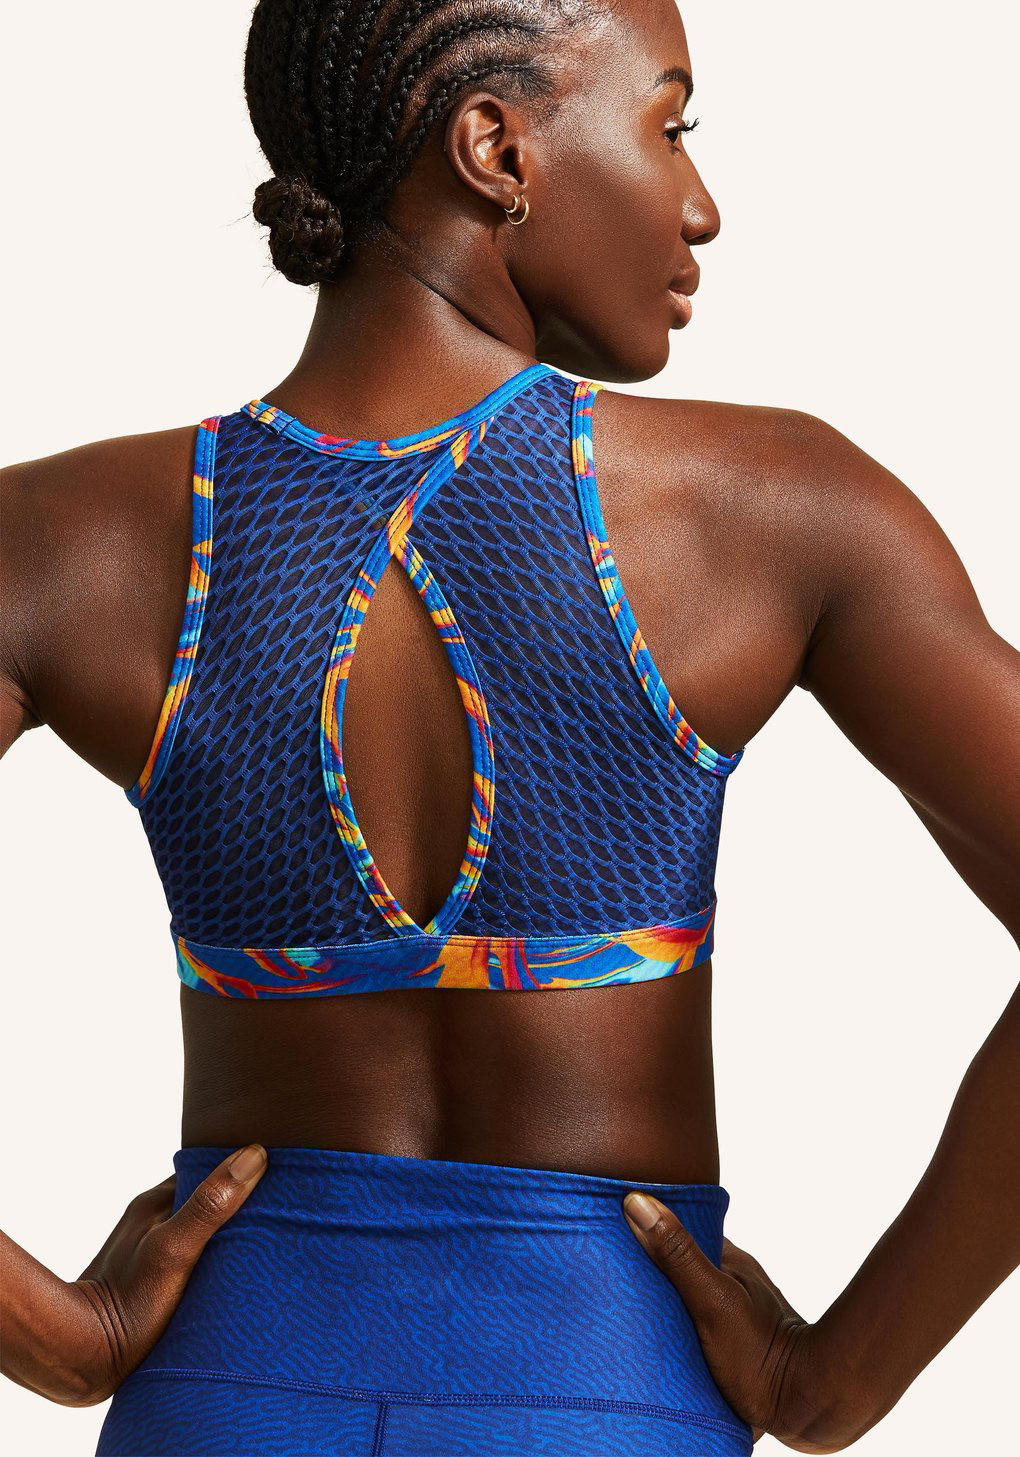 Peloton WITH for x Temi Coker High Neck BLM Black History Month Sports Bra  Size XL - $41 - From Peggy